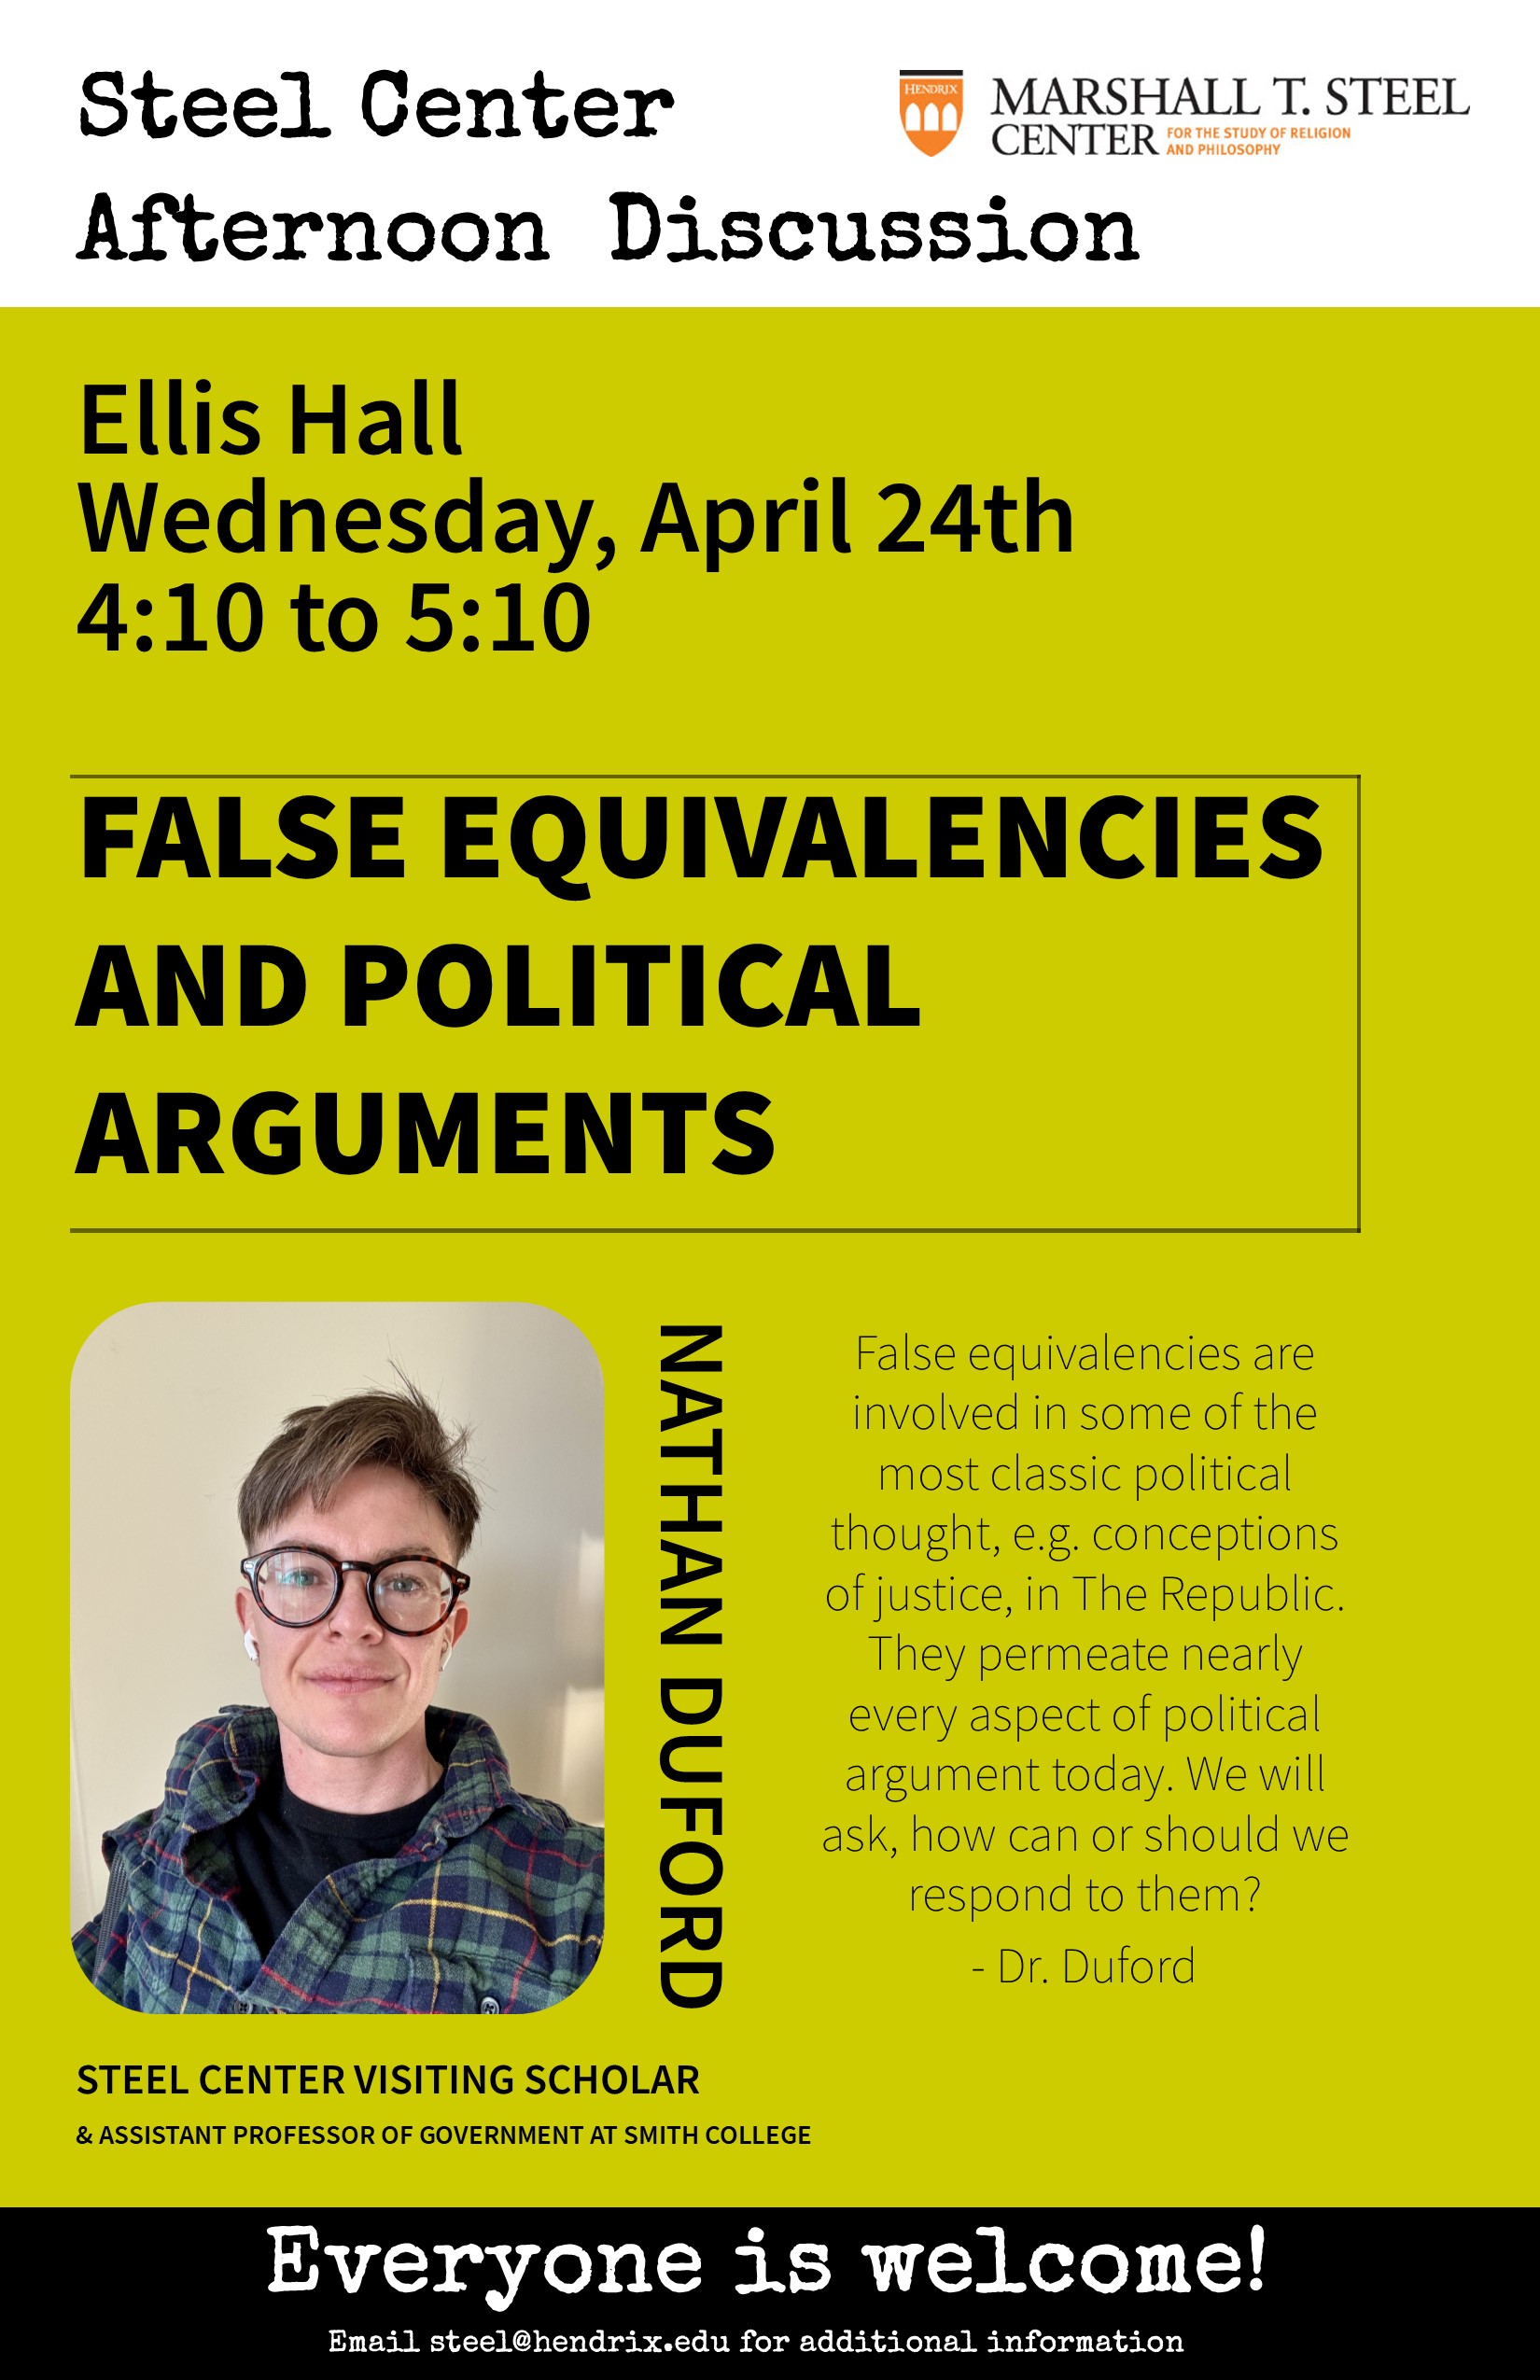 False Equivalencies and Political Arguments Wednesday Afternoon Discussion Flyer